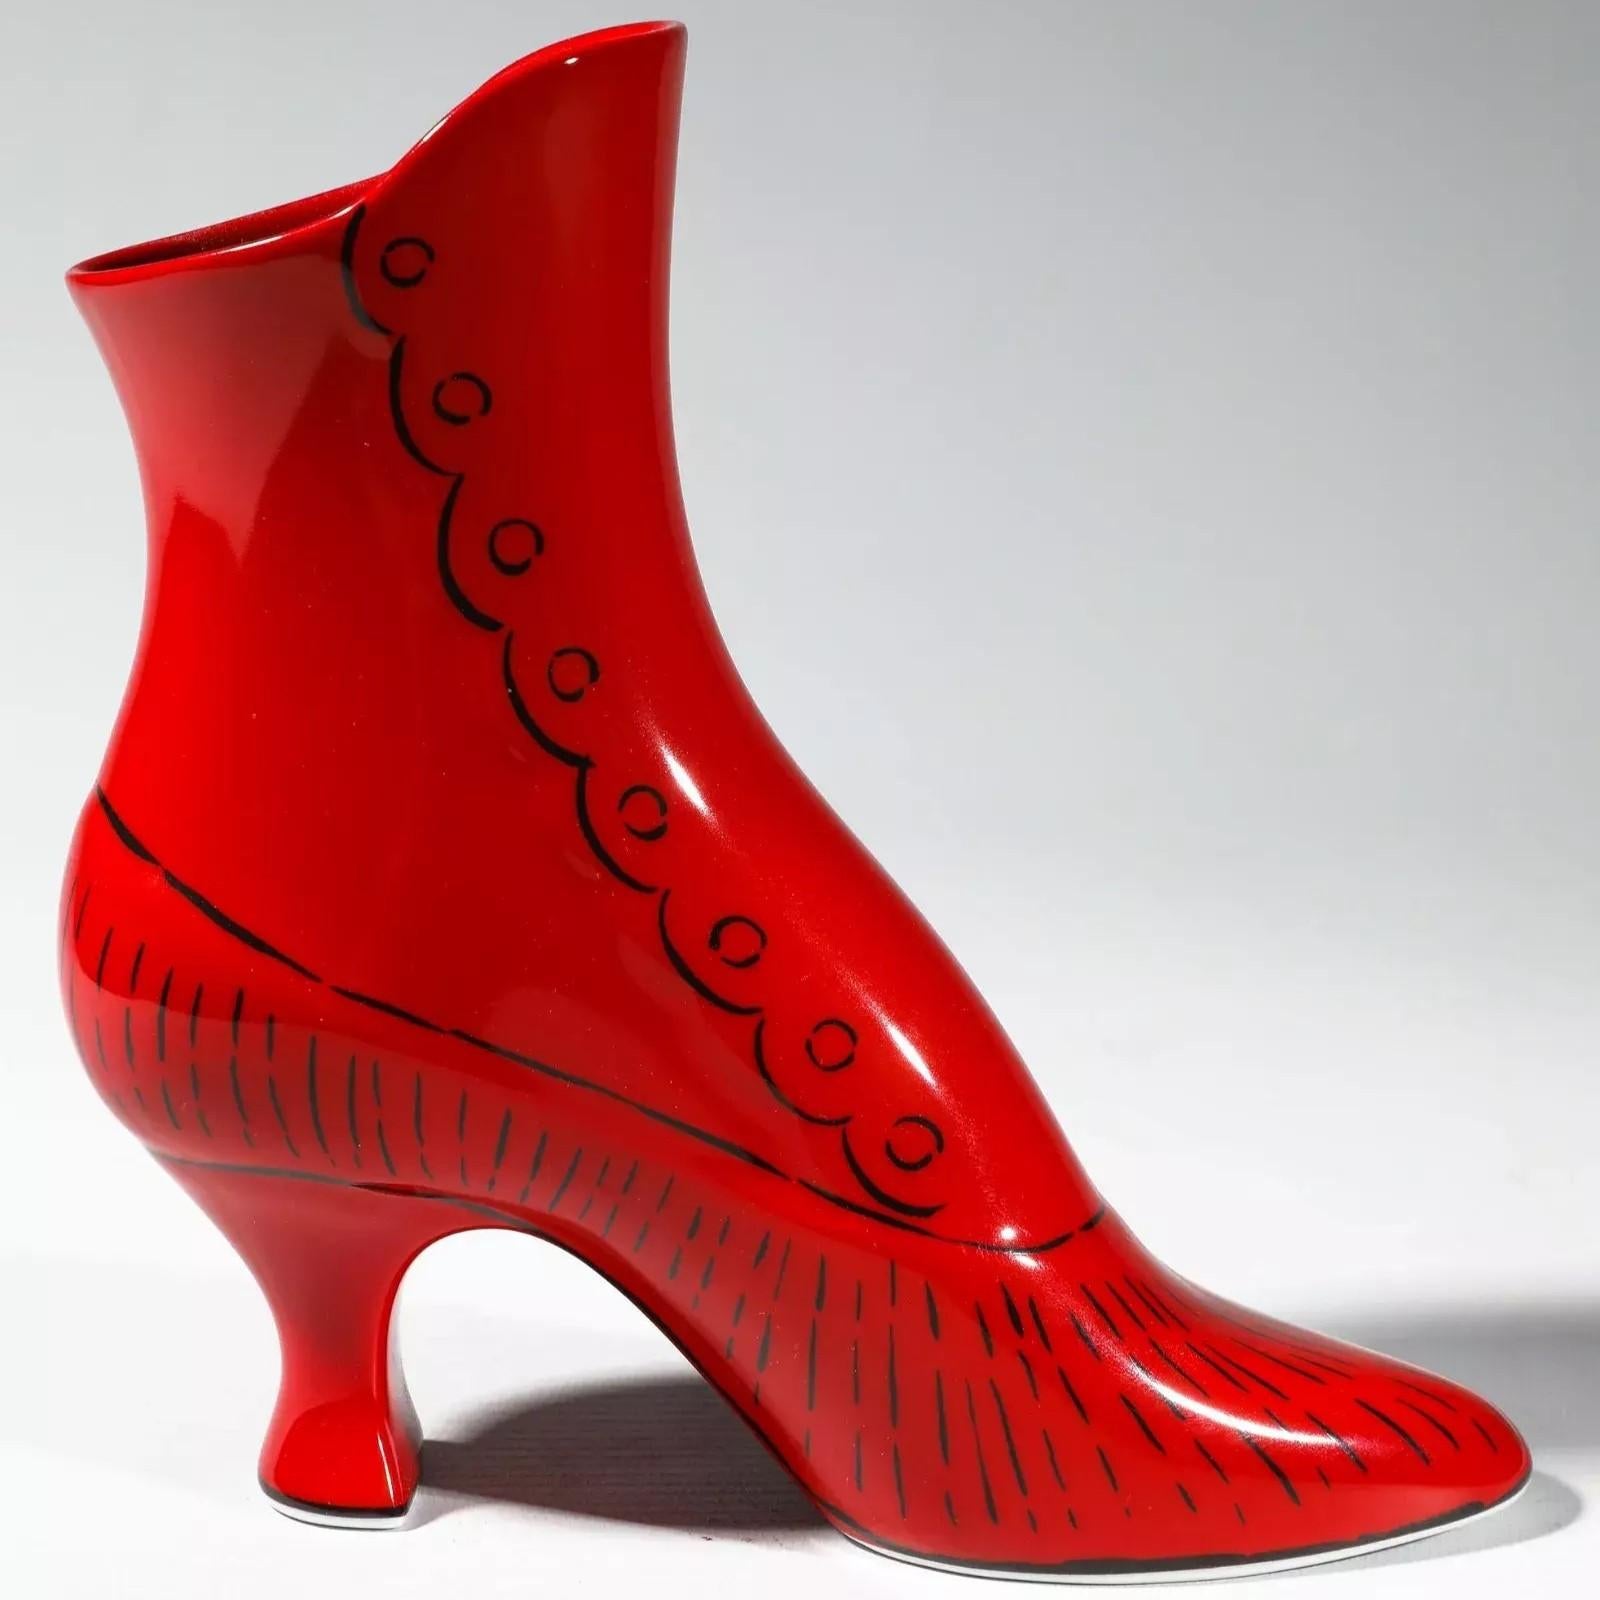 (after) Andy Warhol Figurative Sculpture - Andy Warhol, Red Christmas Shoe -Porcelain, Contemporary, Edition, Pop Art, Gift